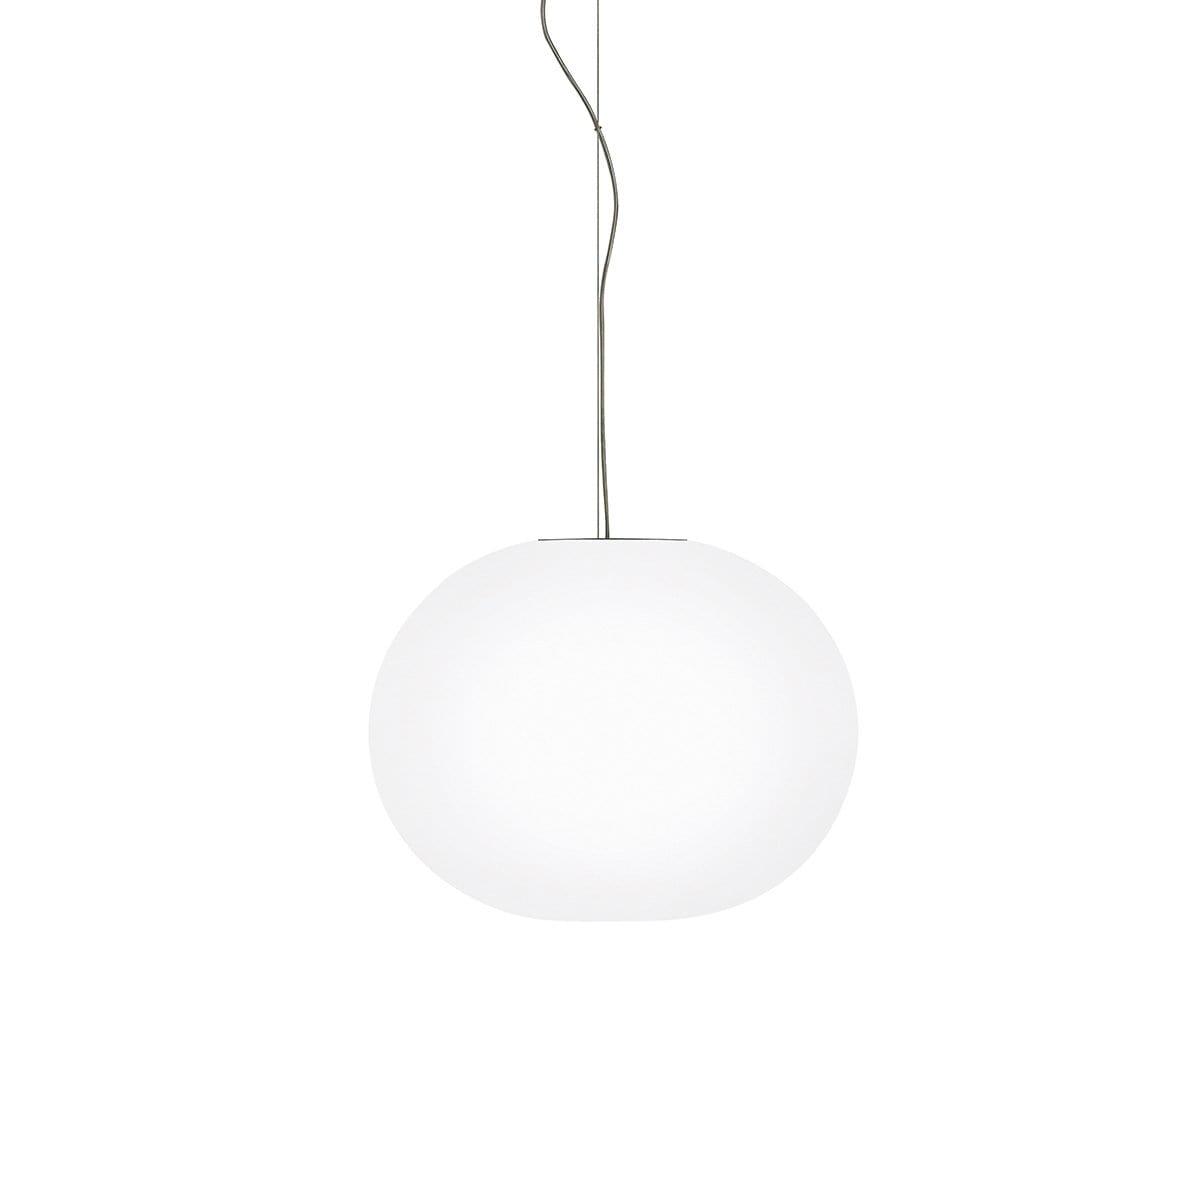 Plante træer nederlag Stejl Glo-Ball S by Flos exclusively through Curated